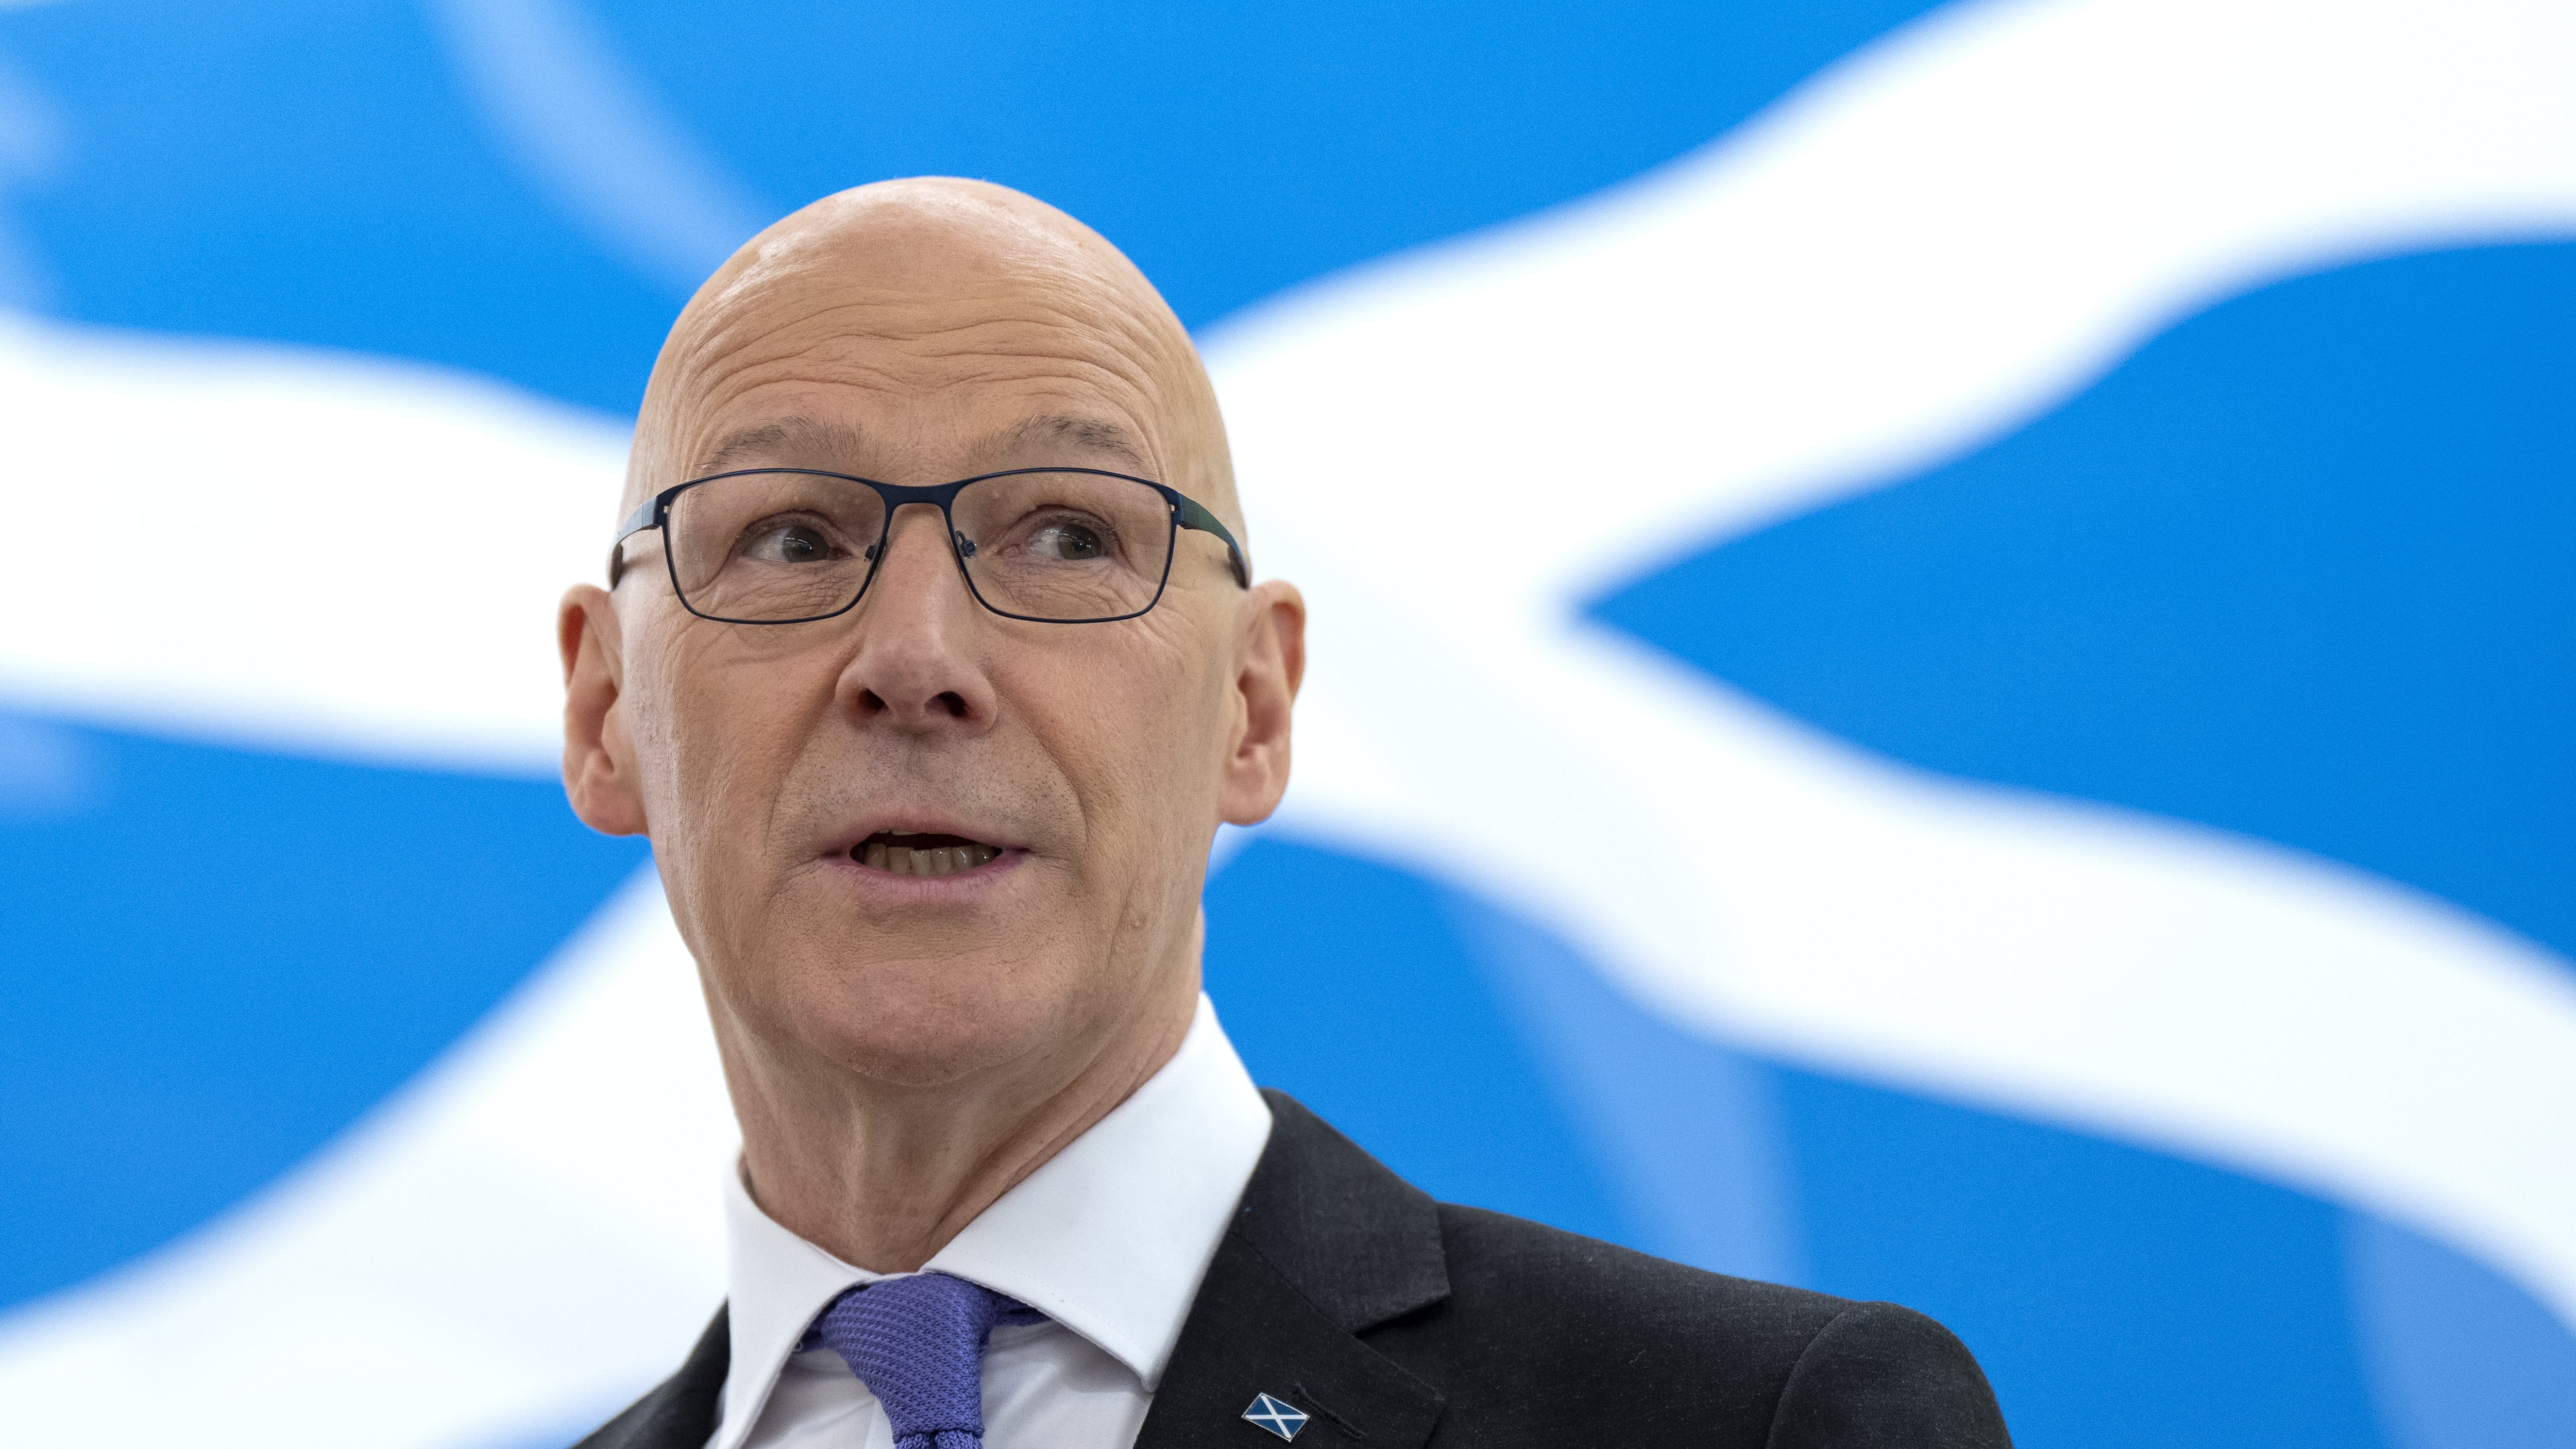 John Swinney thanked SNP members for the donations to pay for the bus